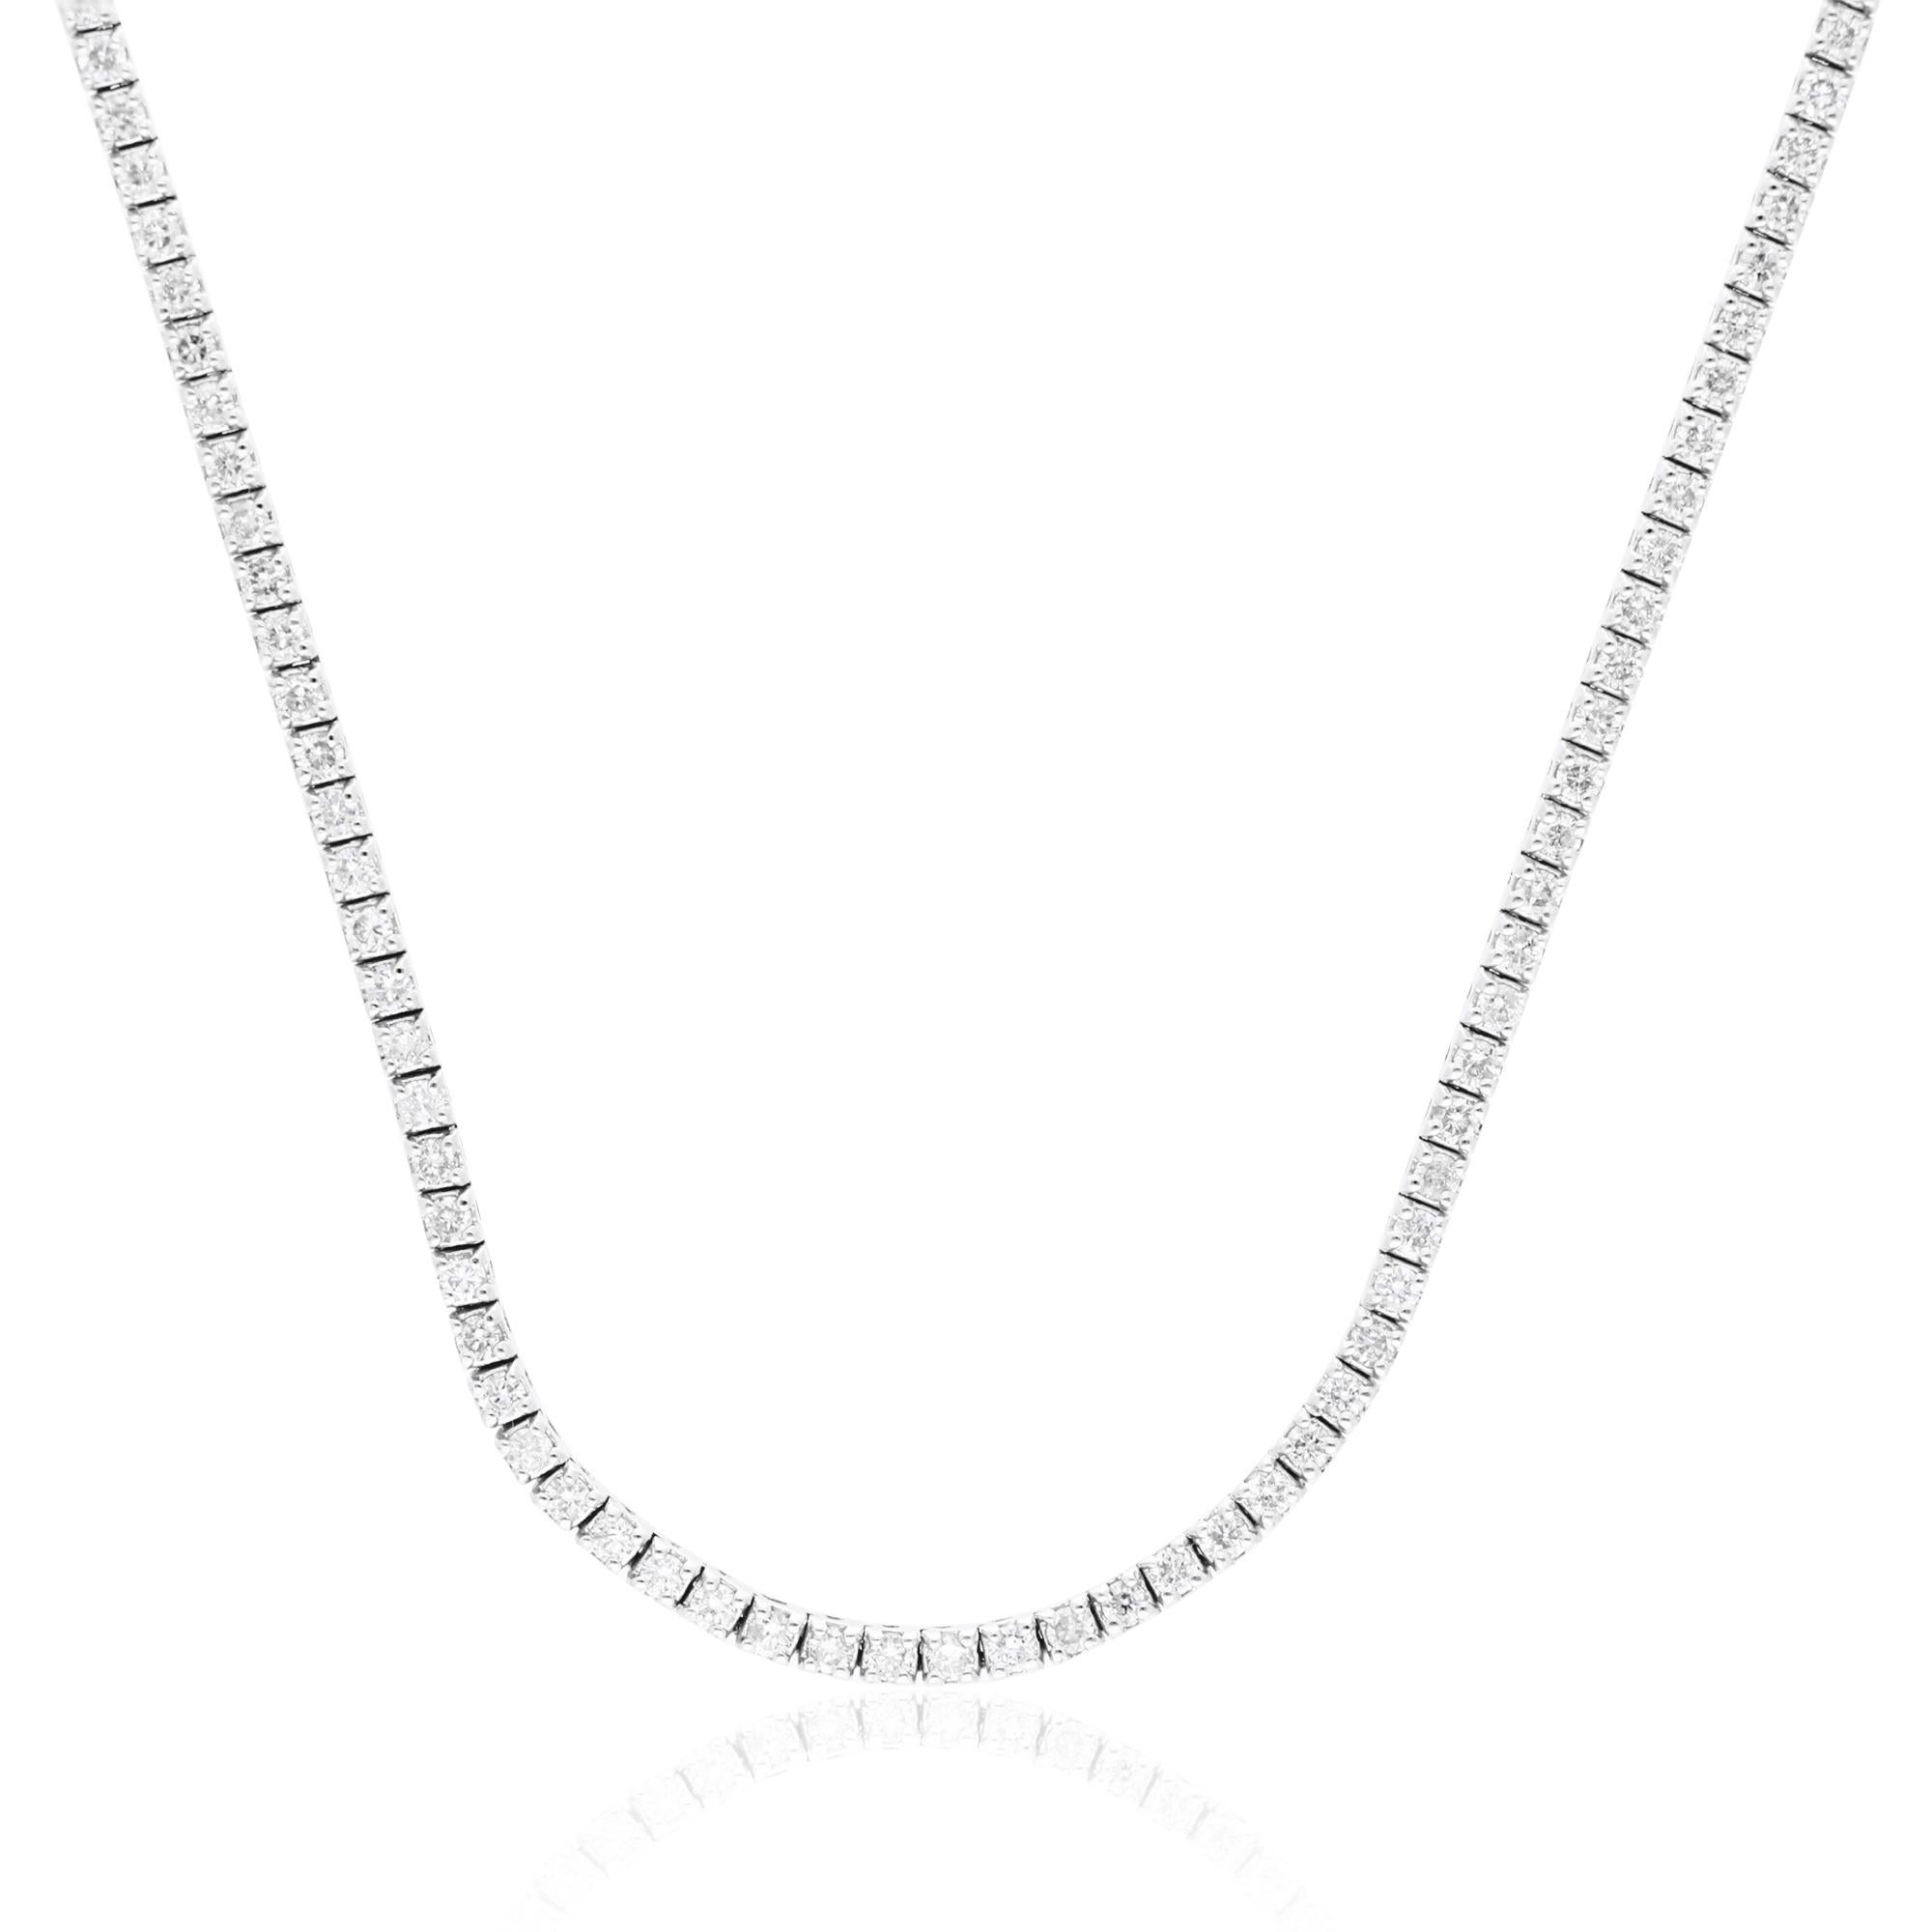 Elevate your jewelry collection with the exquisite Natural 3.40 Carat SI Clarity HI Color Diamond Tennis Necklace in 10k White Gold. This stunning piece of fine jewelry showcases the timeless beauty of diamonds in a classic and sophisticated